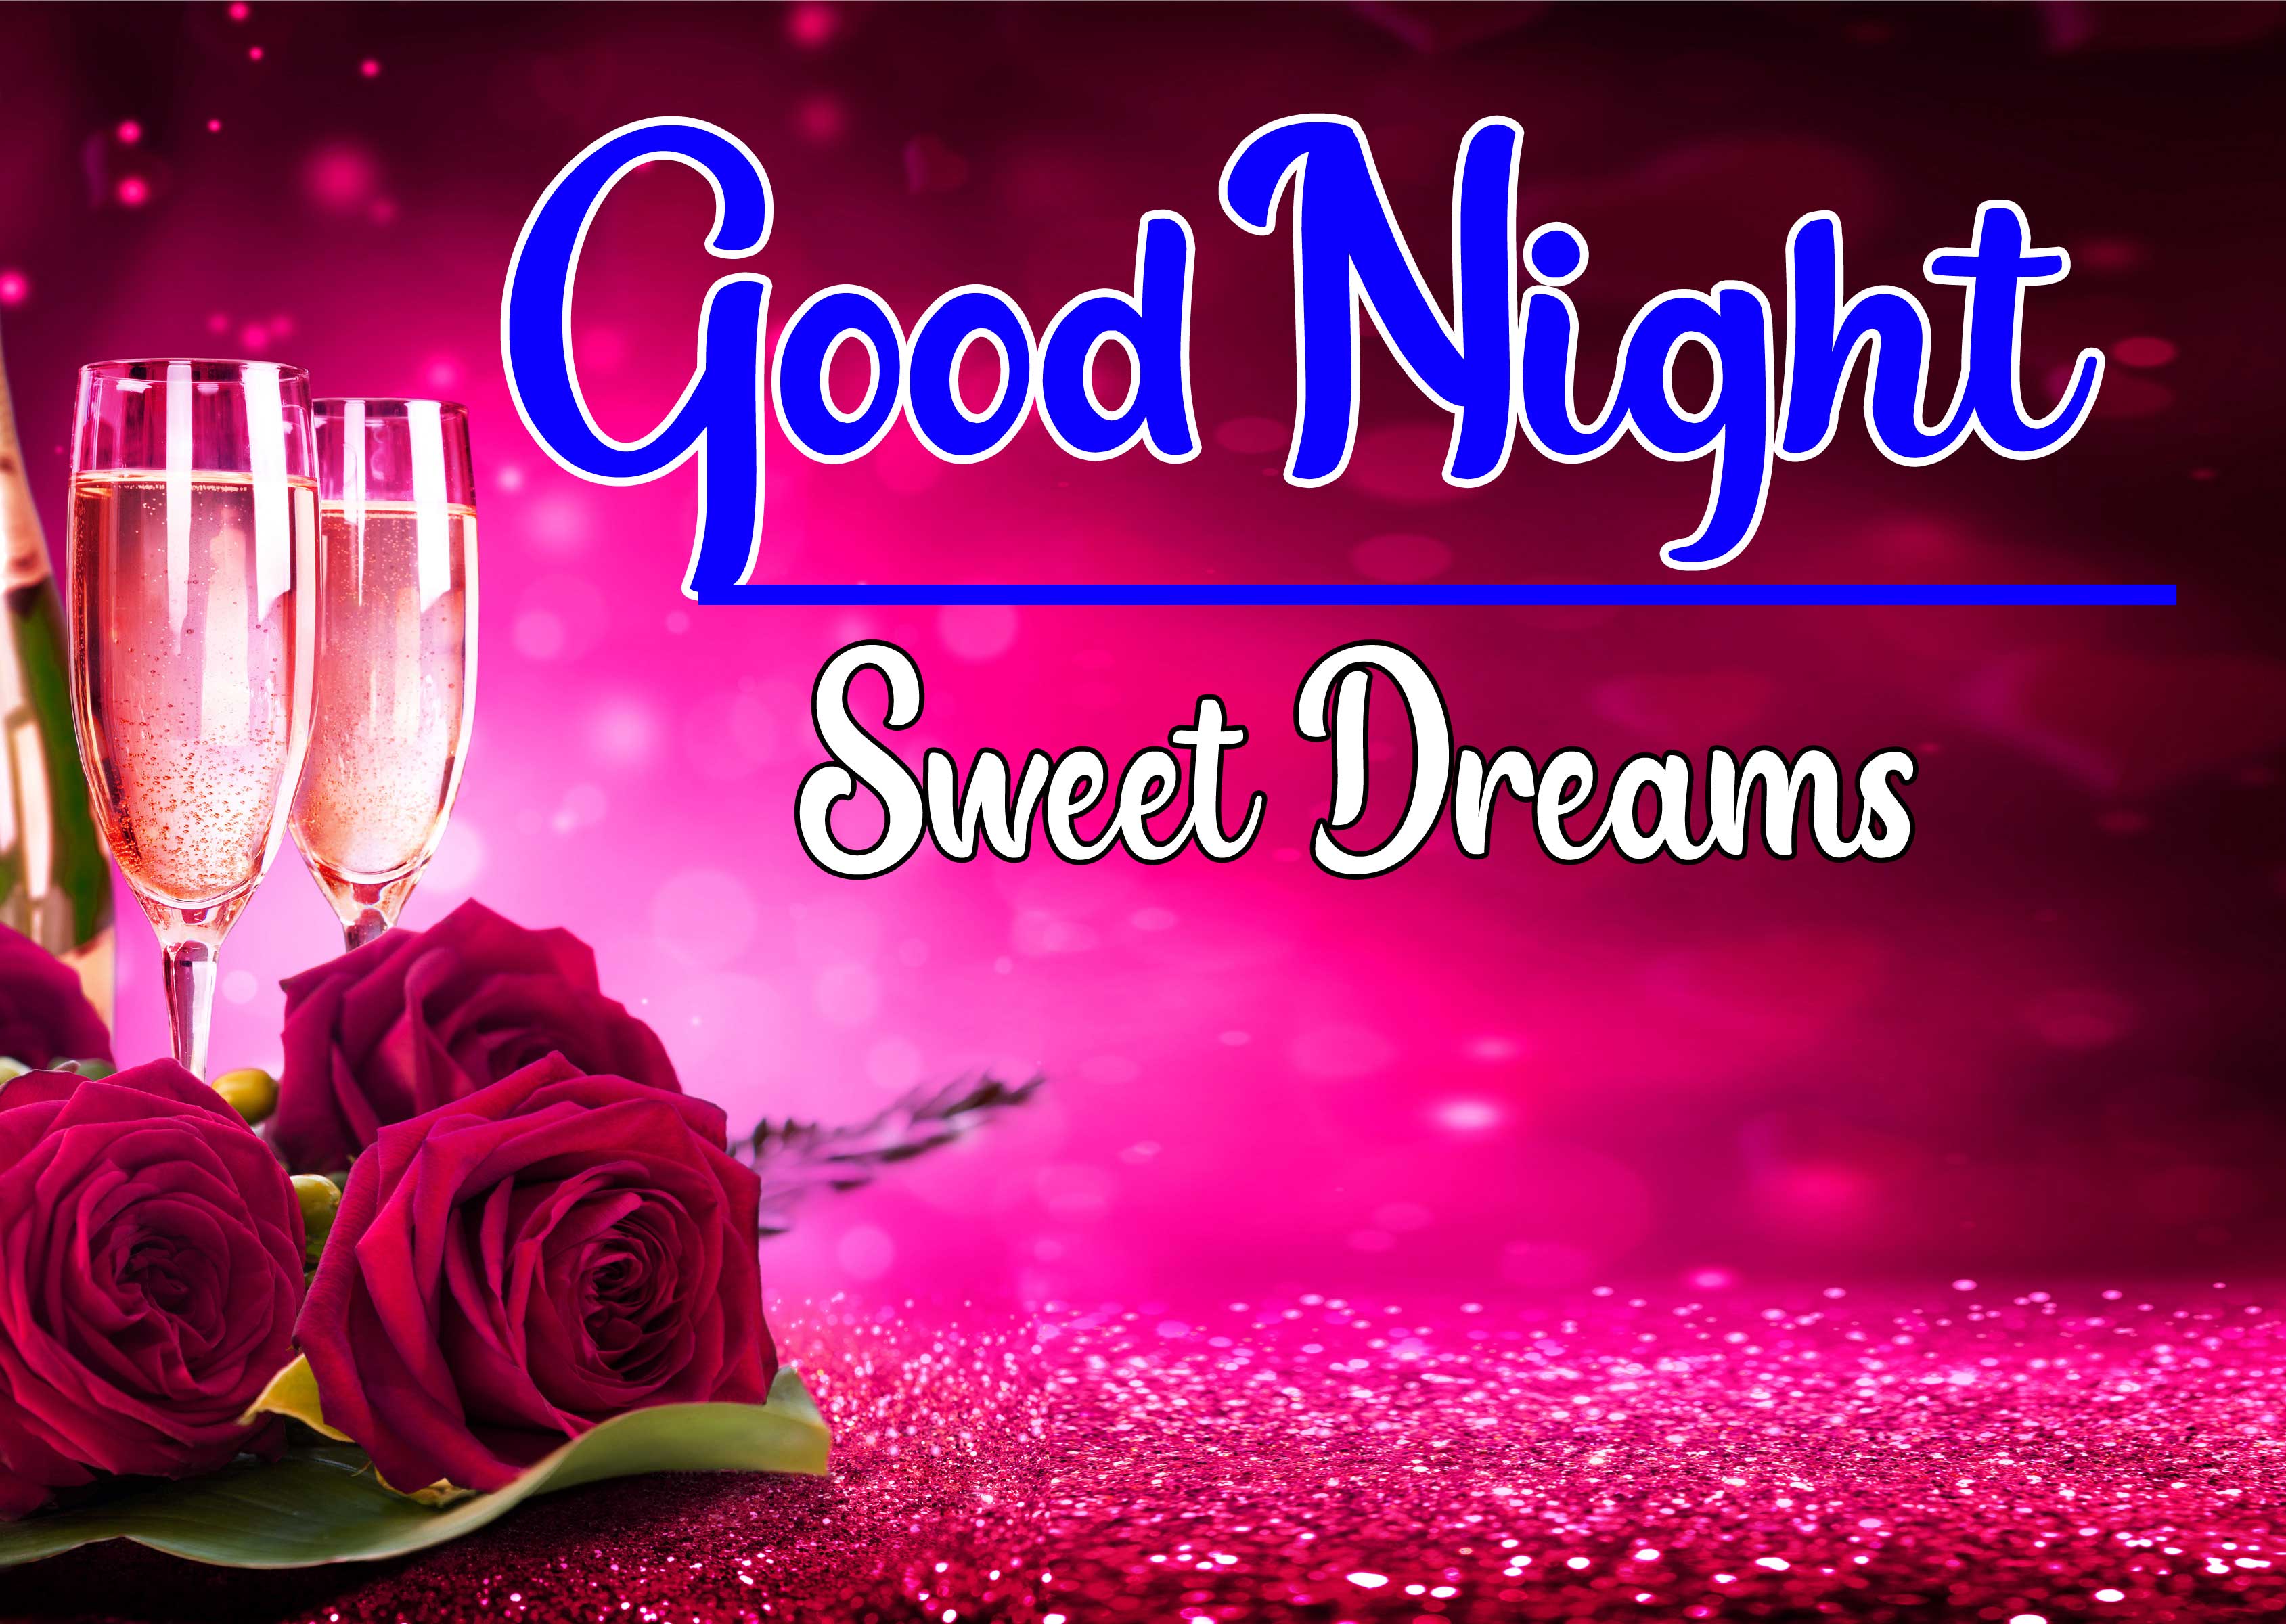 Good Night Wallpapers 1080p Hd Best Pictures Images  Photos 2023